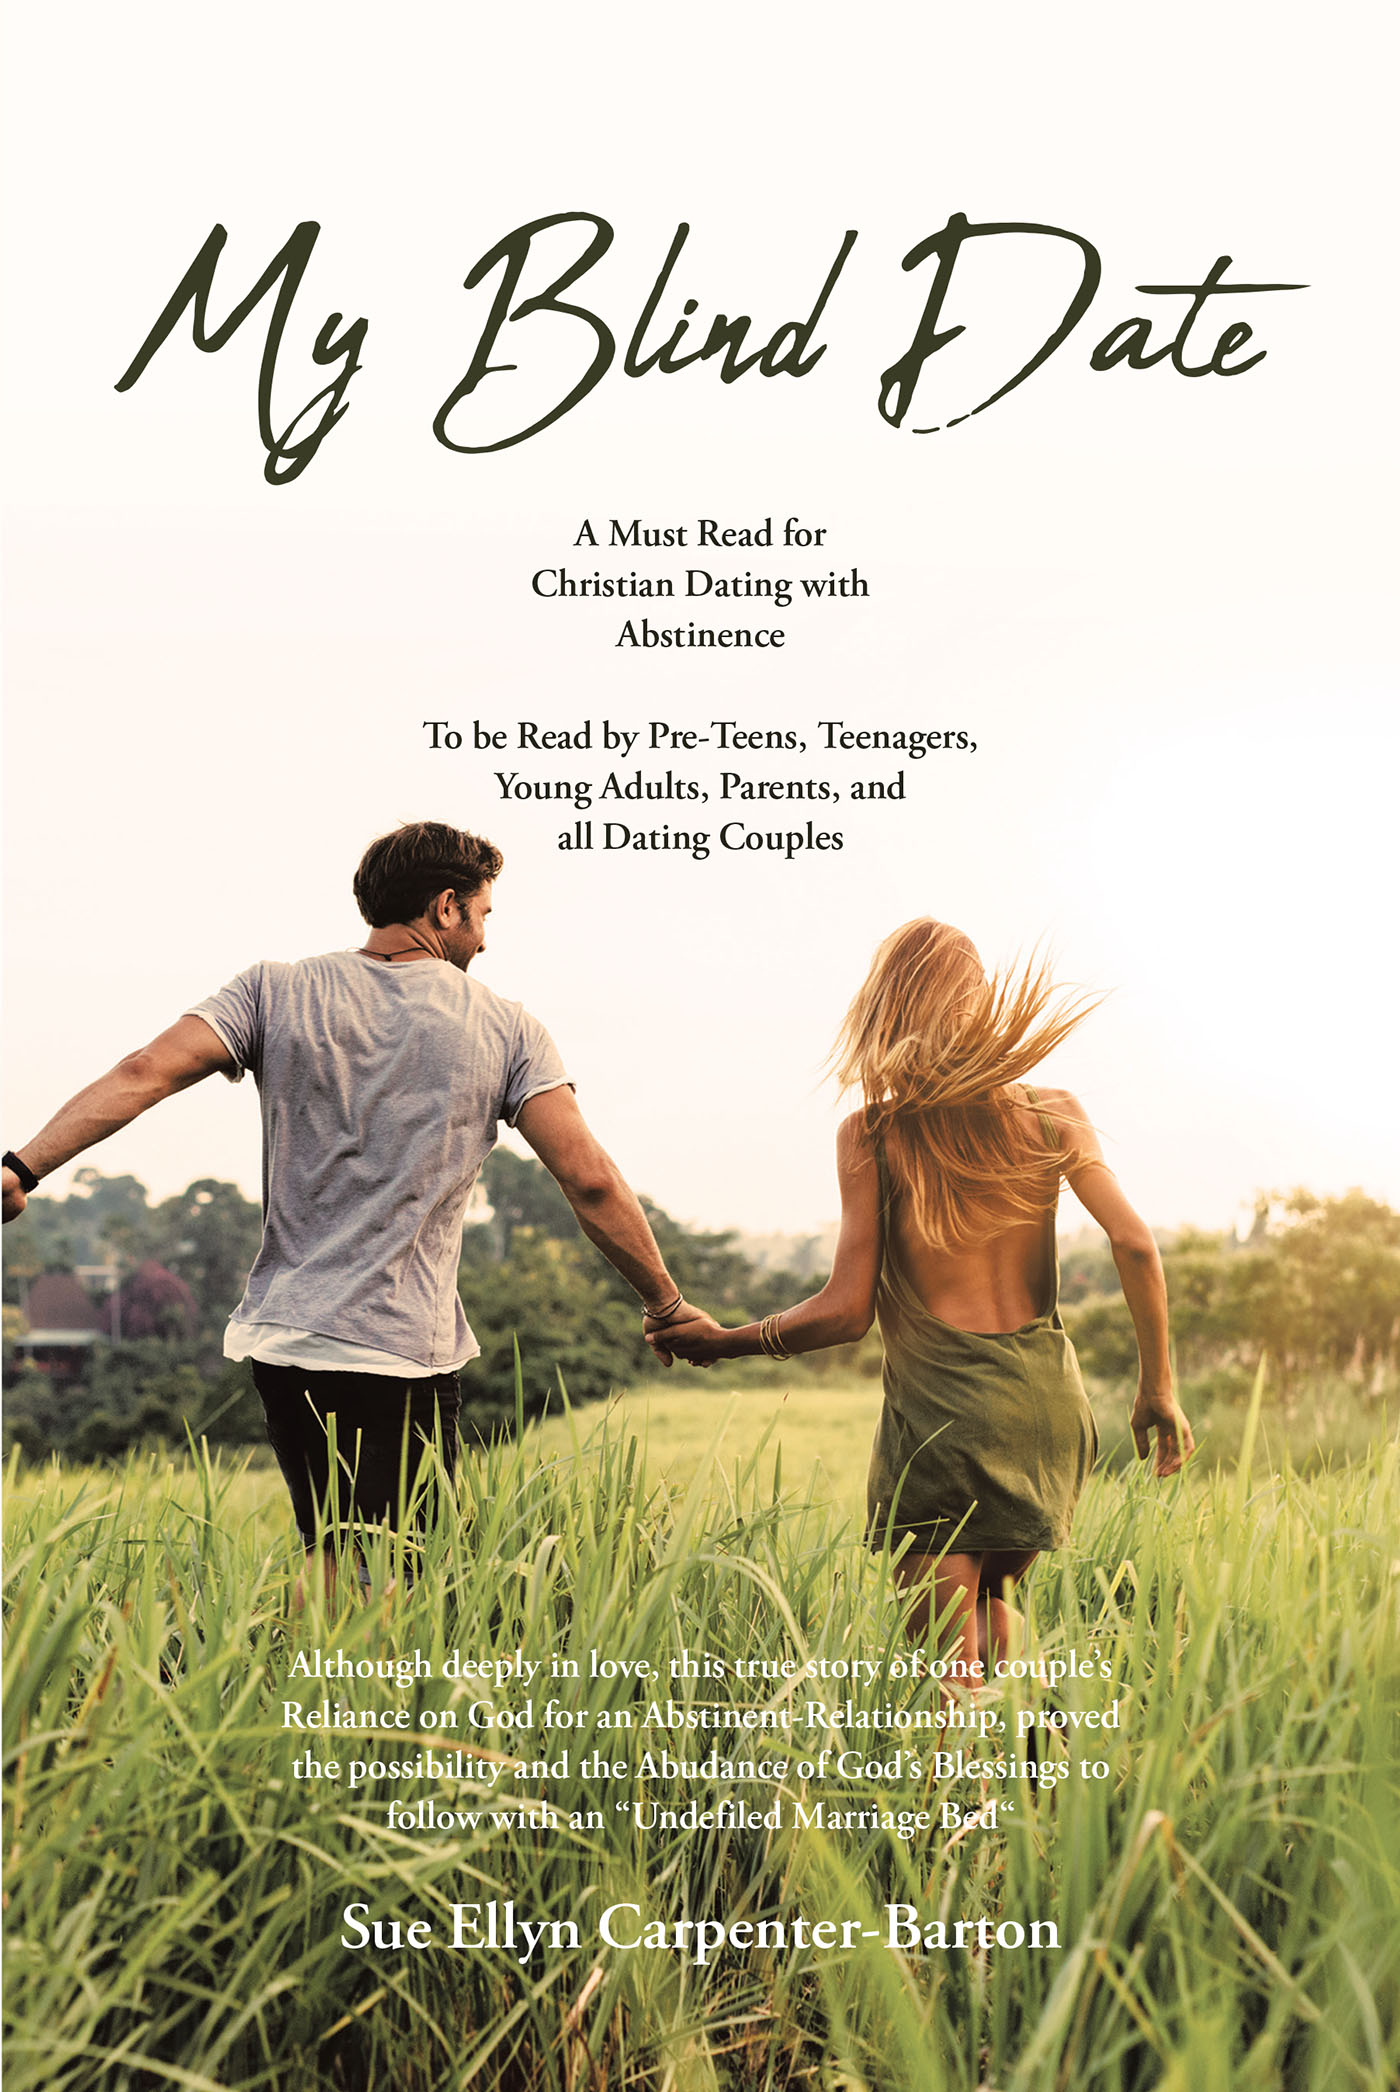 Author Sue Ellyn Carpenter-Barton’s New Book, "My Blind Date," is a Profound Look at How Important Abstinence While Dating is for Maintaining a Strong & Healthy Marriage